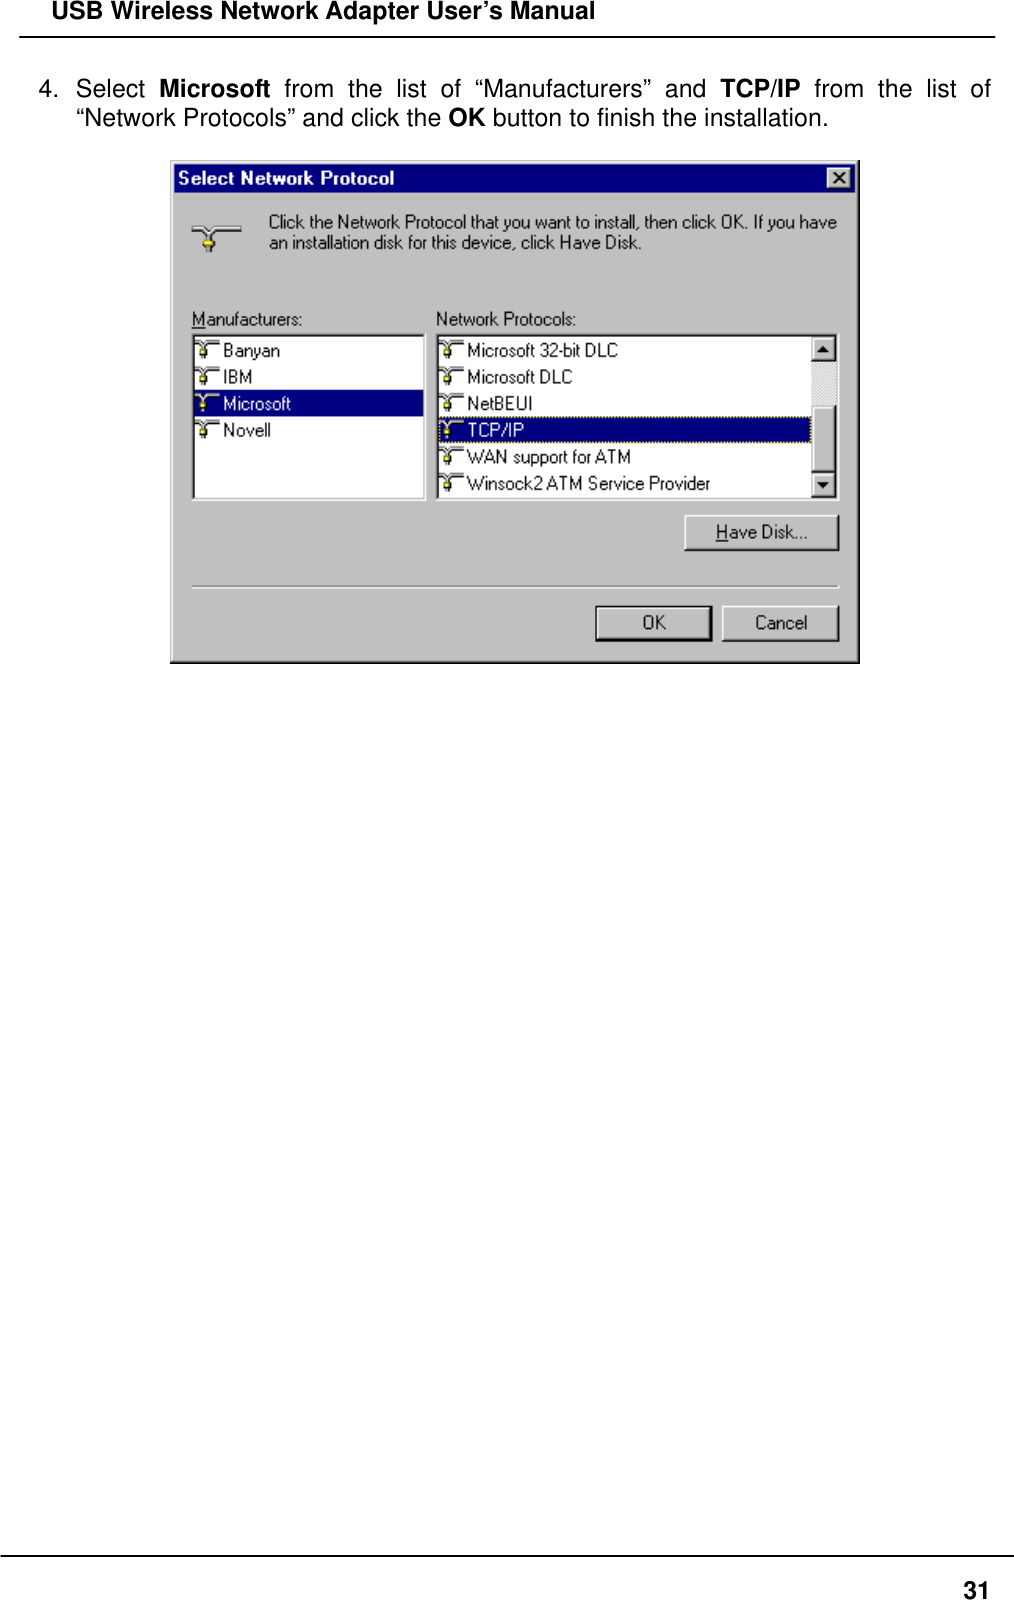   USB Wireless Network Adapter User’s Manual 4. Select Microsoft from the list of “Manufacturers” and TCP/IP from the list of “Network Protocols” and click the OK button to finish the installation.                                       31